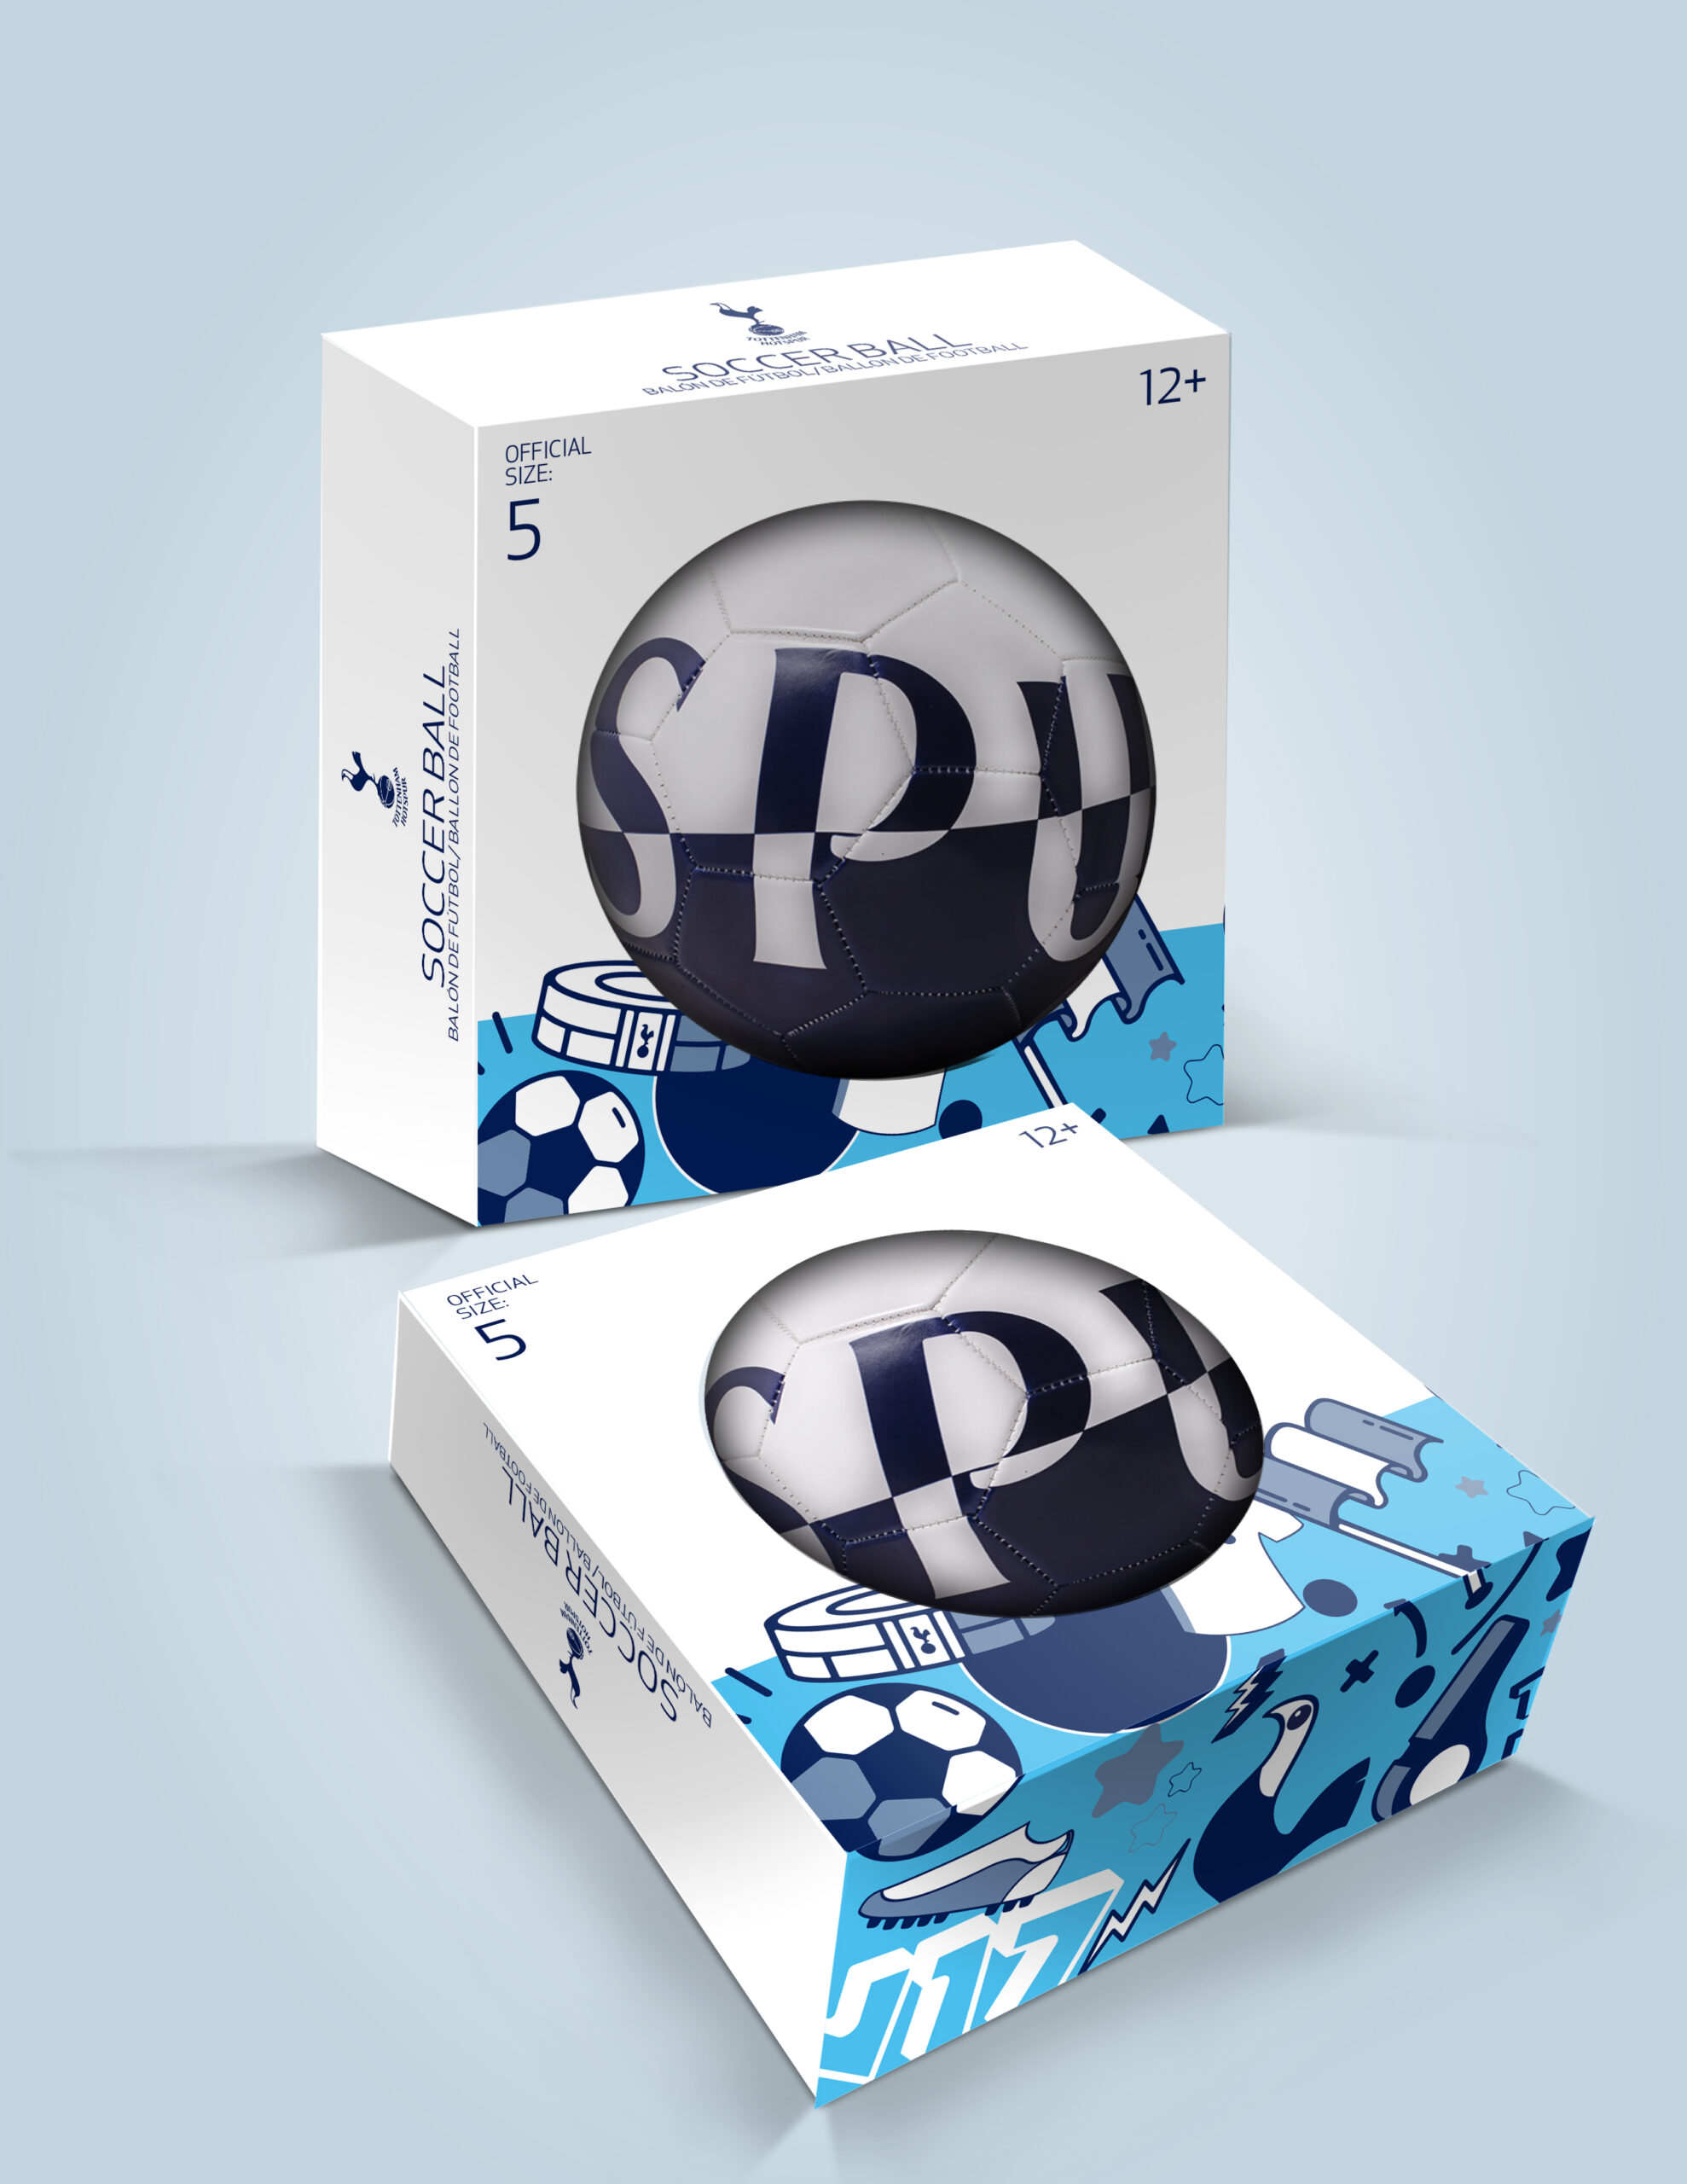 Soccer Balls Design and Packaging